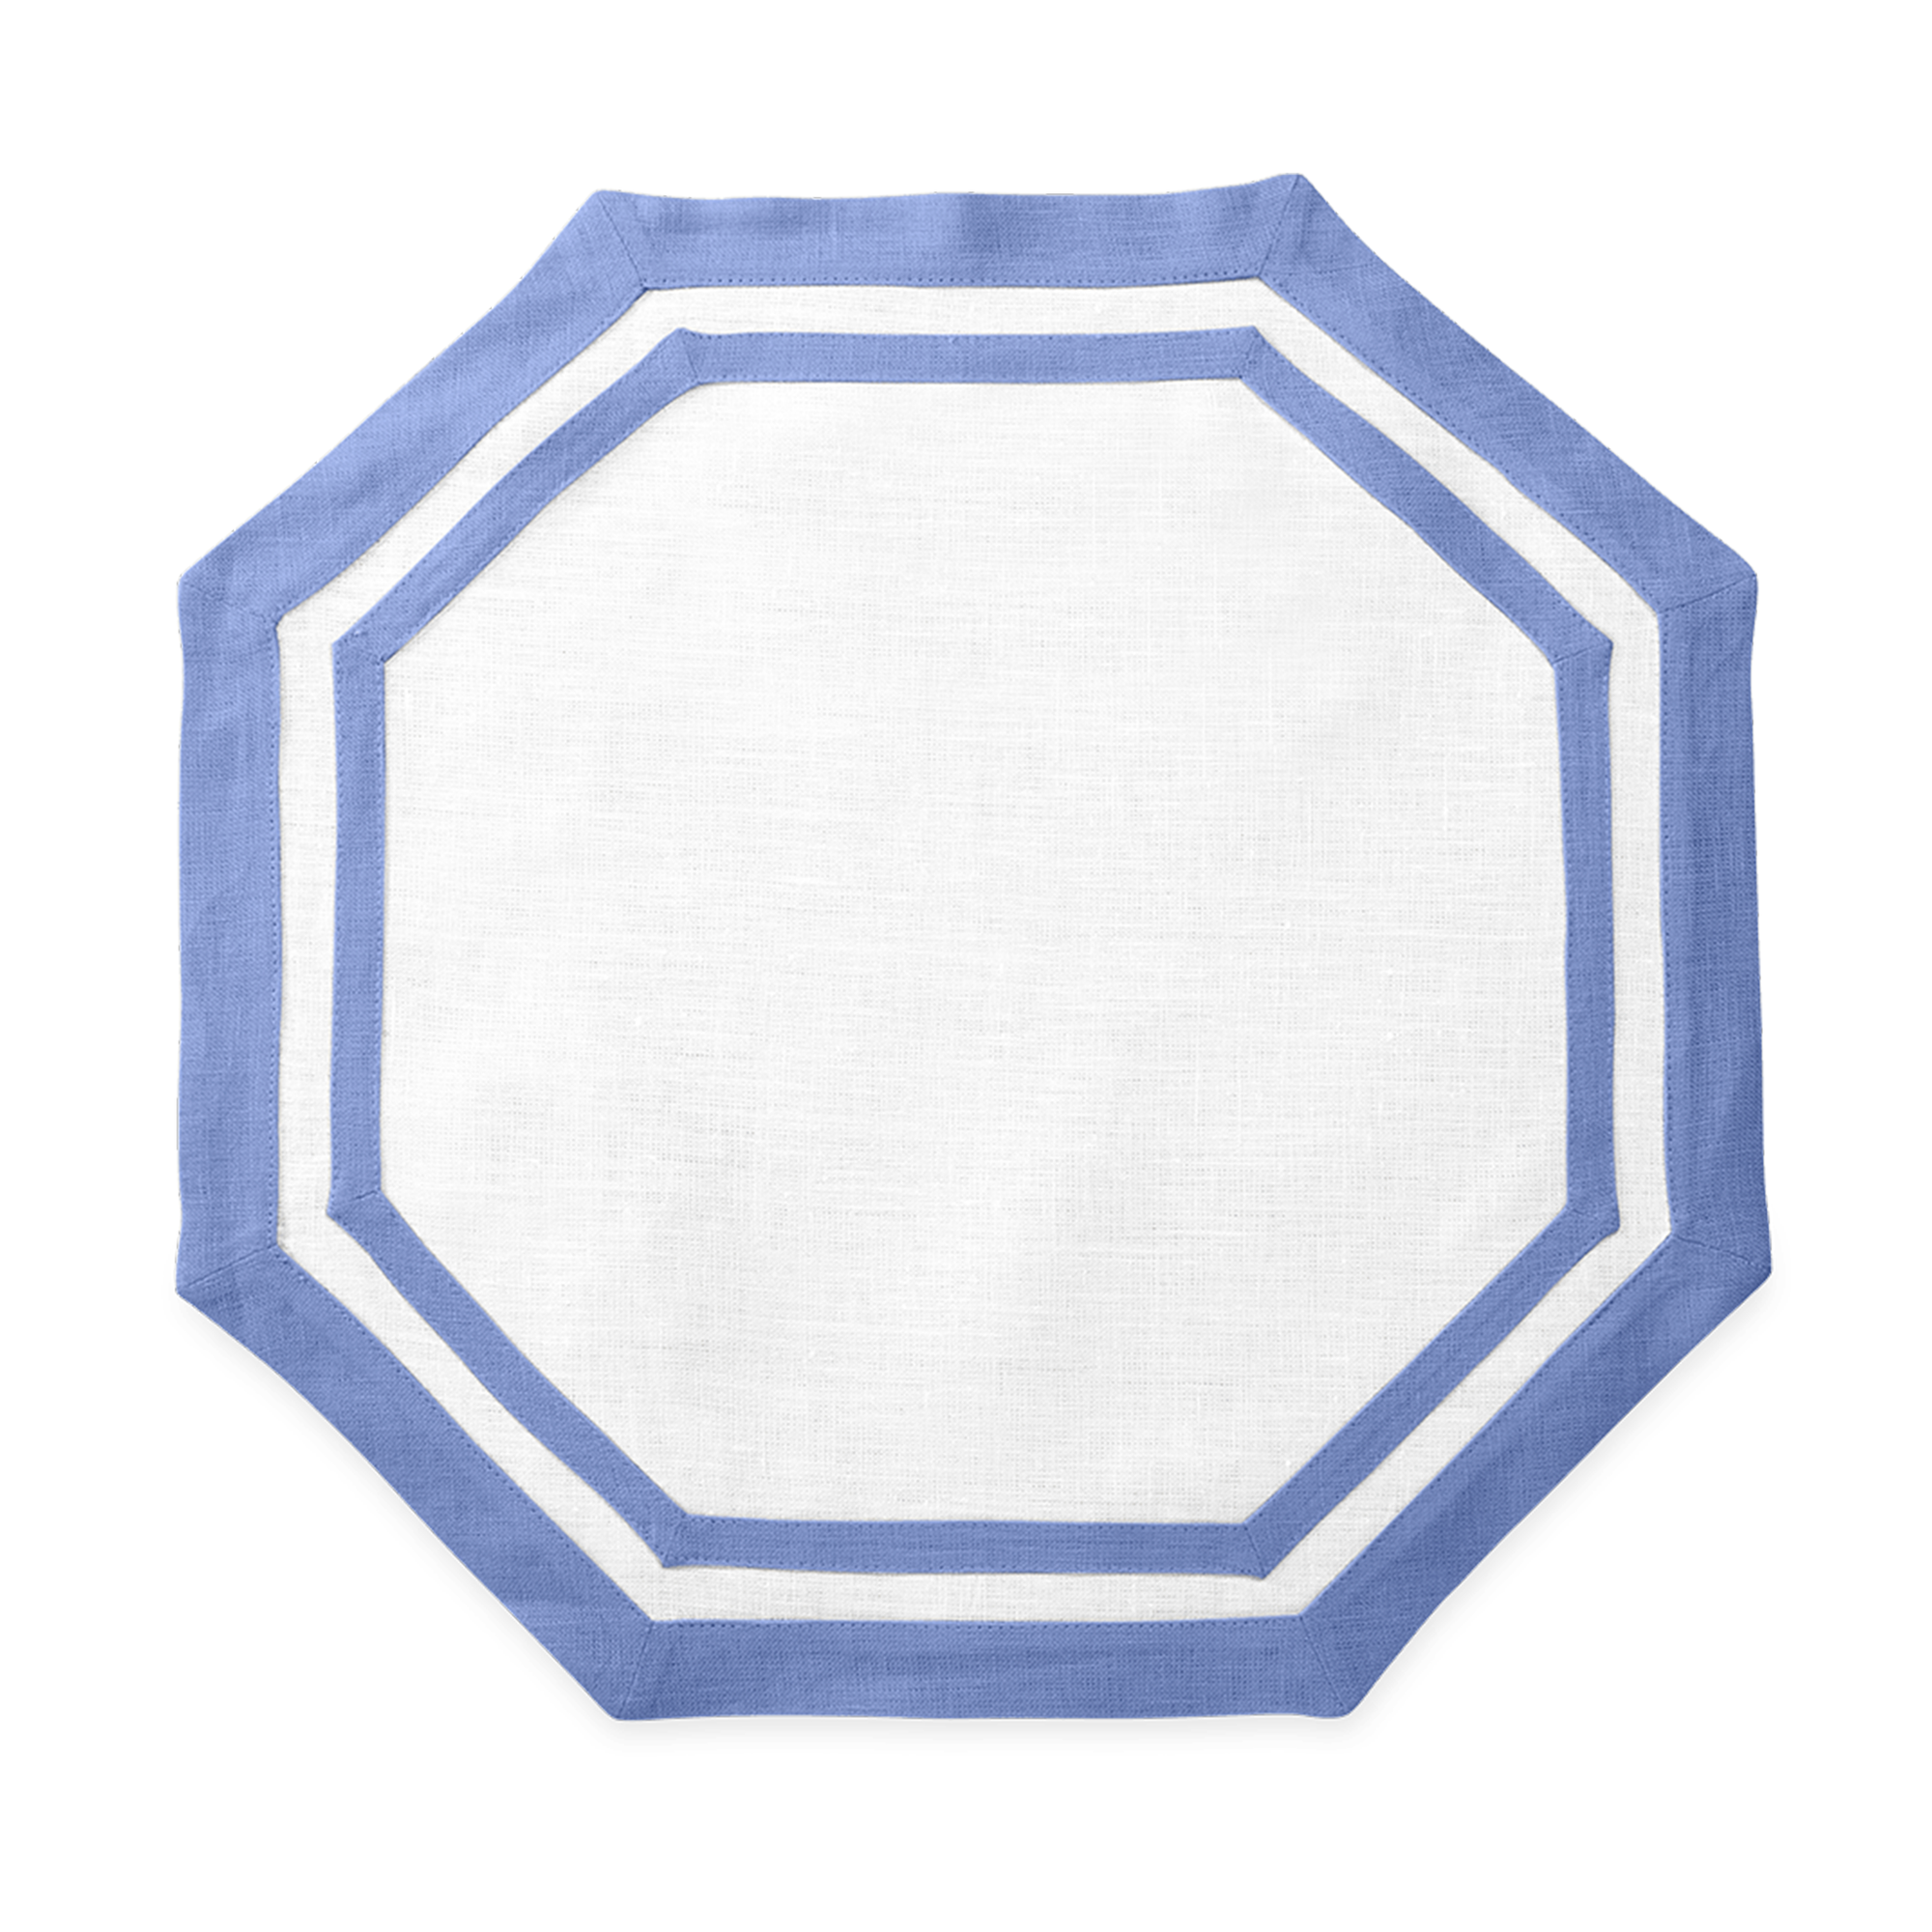 Silo Image of Matouk Double Border Octagon Placemat in Color Sky Blue